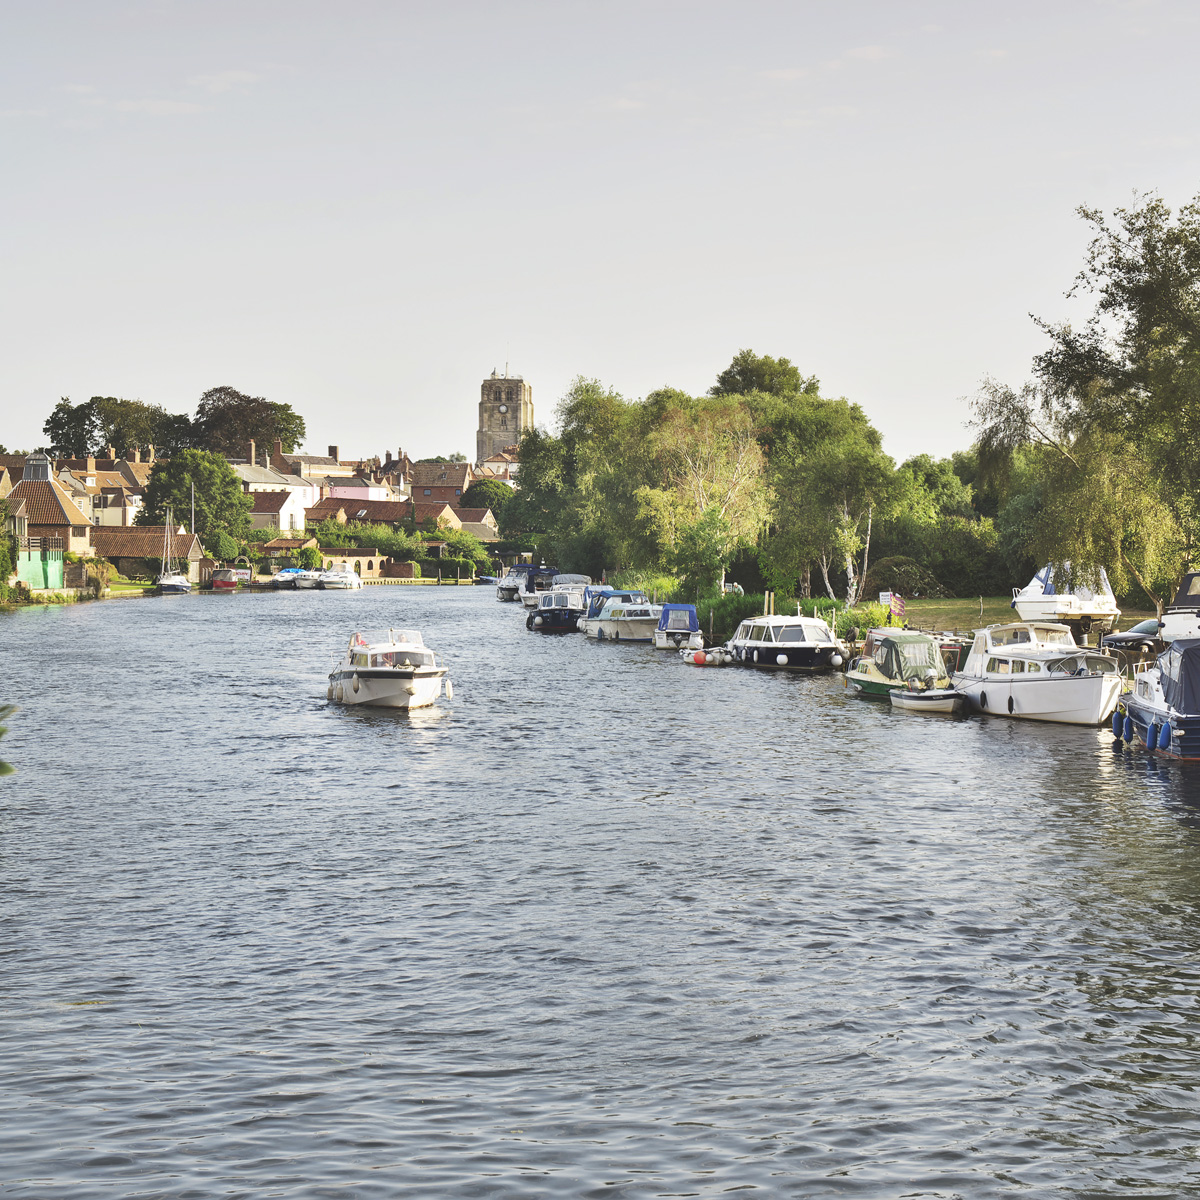 Boat travelling down the river waveney, with historic buildings visible in the background